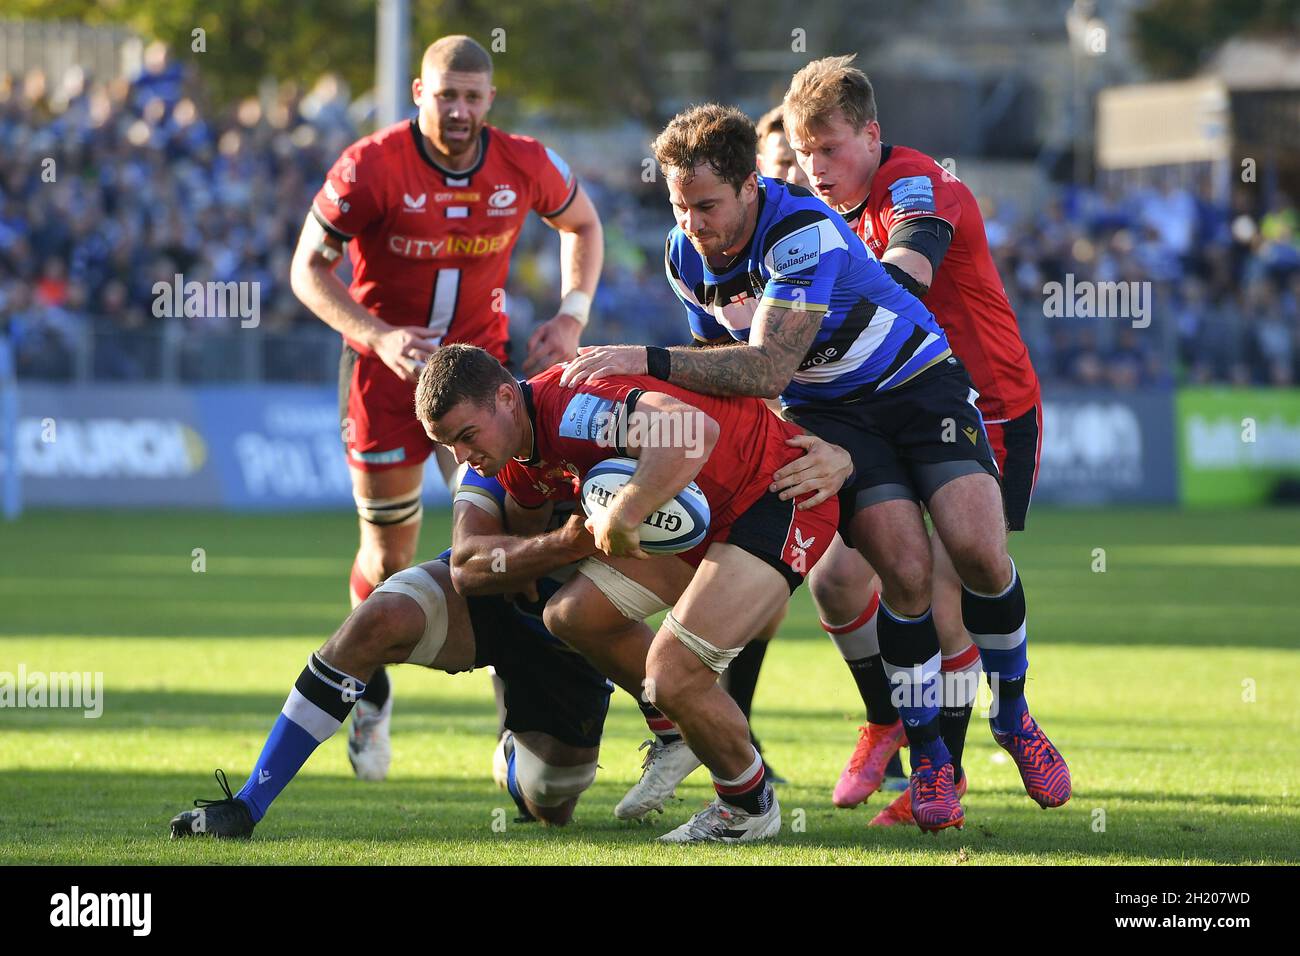 The Recreation Ground, Bath, England, UK. 17th October, 2021. Saracens' Ben Earl is tackled by Bath Rugby's Josh Bayliss (hidden) and Danny Cipriani during the Gallagher English Premiership match between Bath Rugby and Saracens: Credit: Ashley Western/Alamy Live News Stock Photo